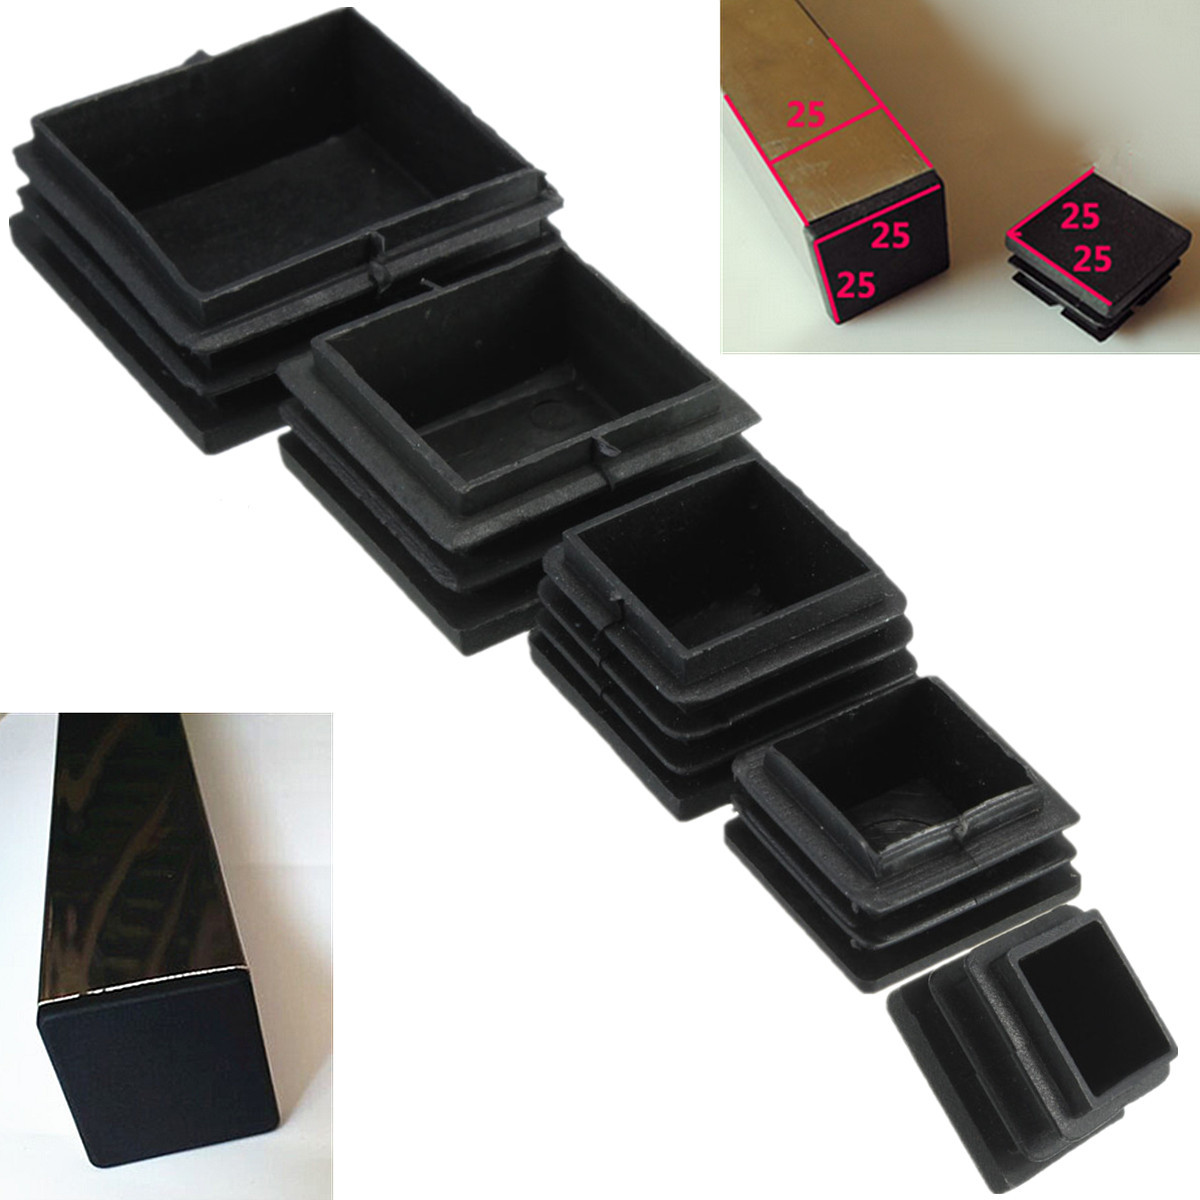 

10pcs Plastic Black Blanking End Caps Square Inserts For Tube Pipe Box Section